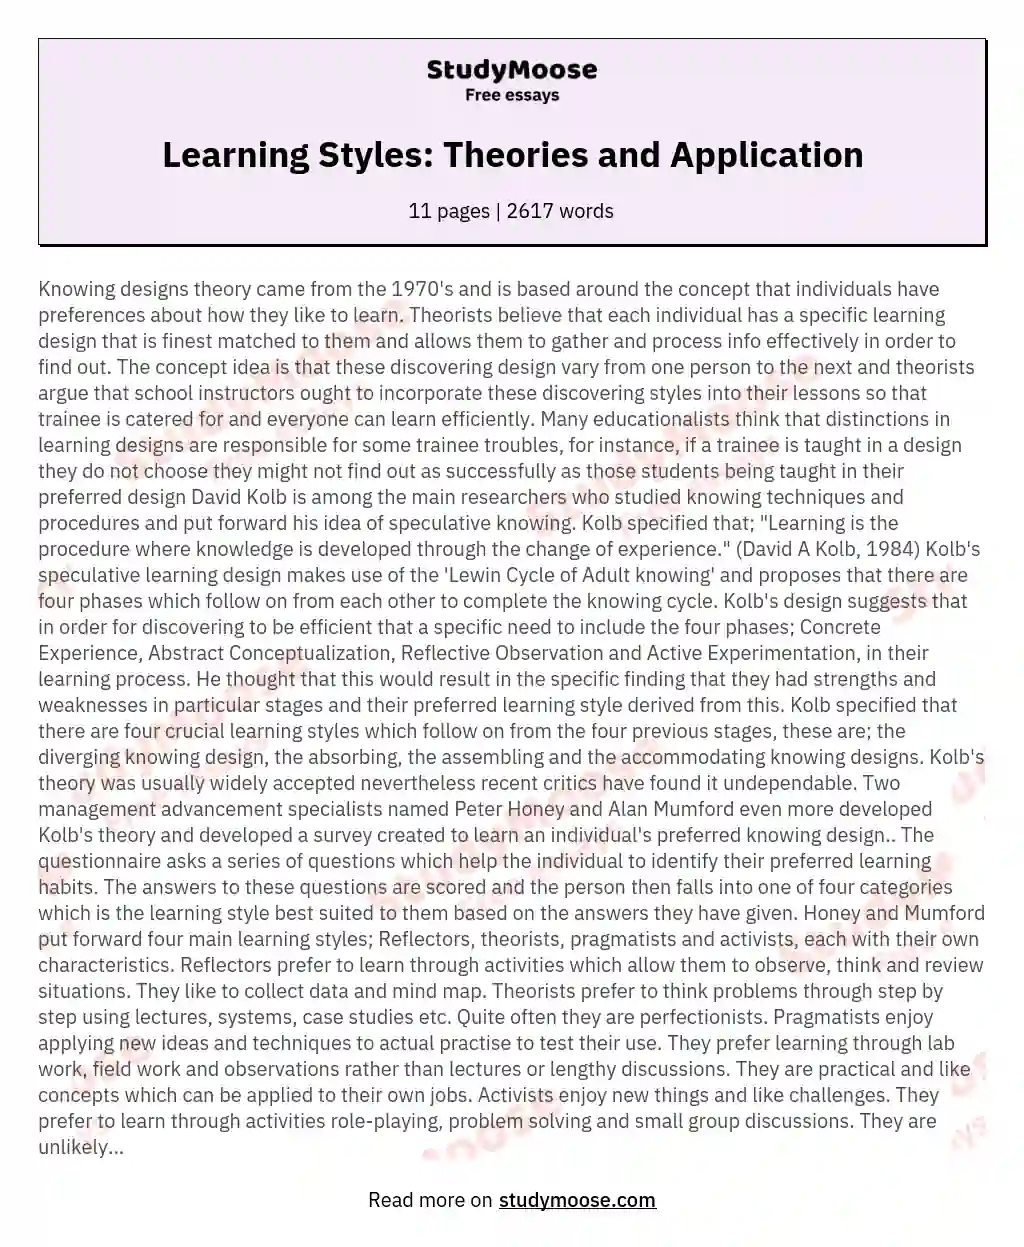 Learning Styles: Theories and Application essay